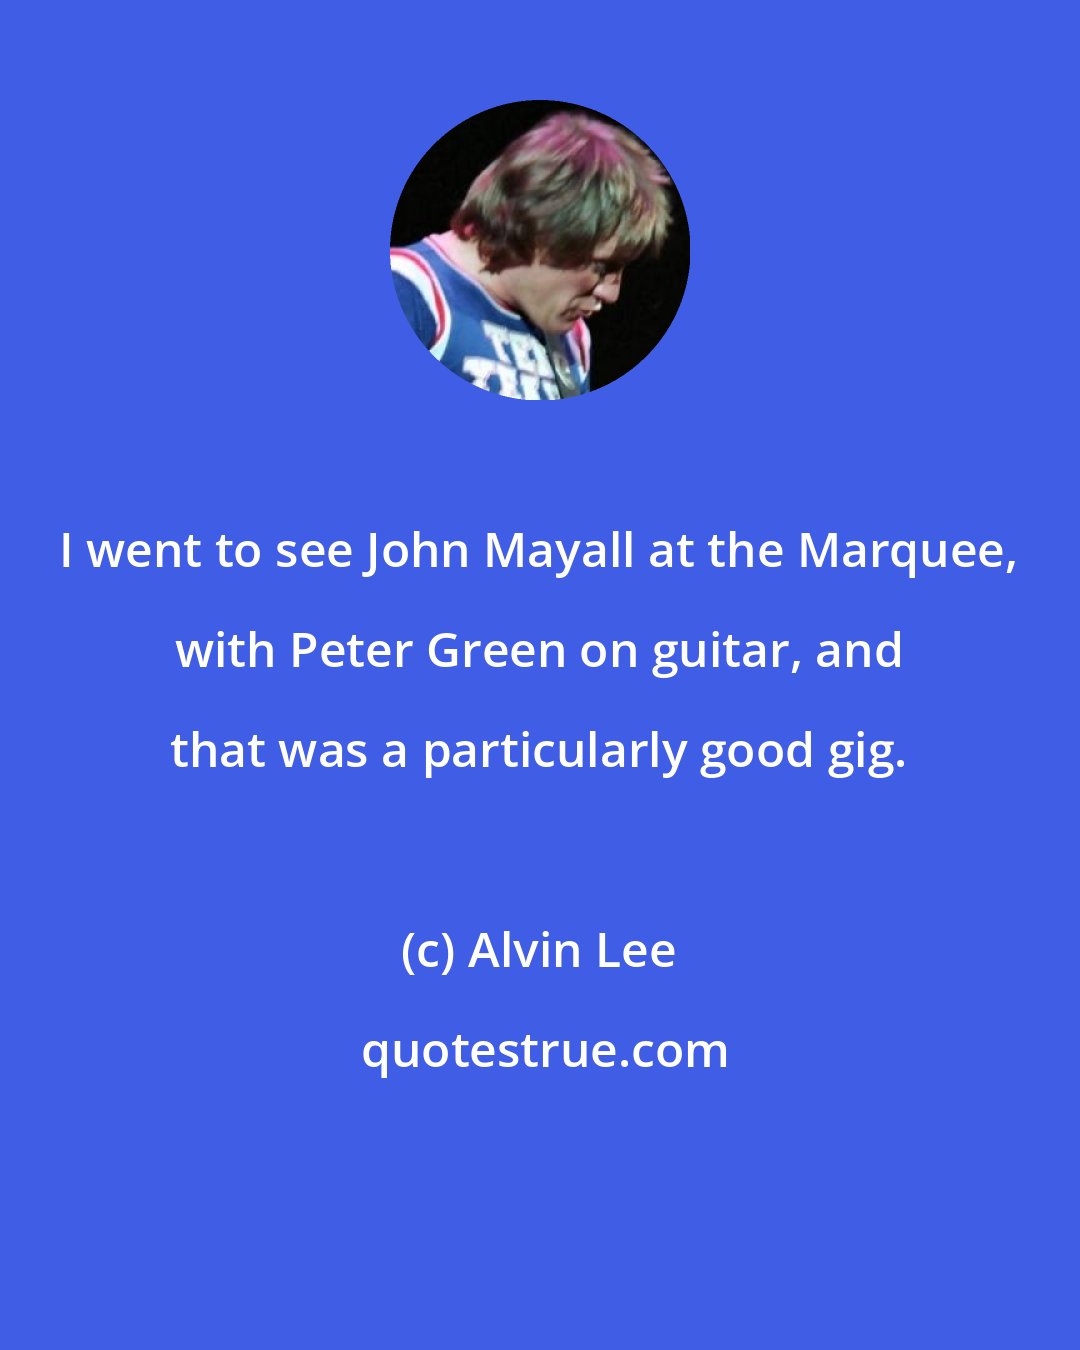 Alvin Lee: I went to see John Mayall at the Marquee, with Peter Green on guitar, and that was a particularly good gig.